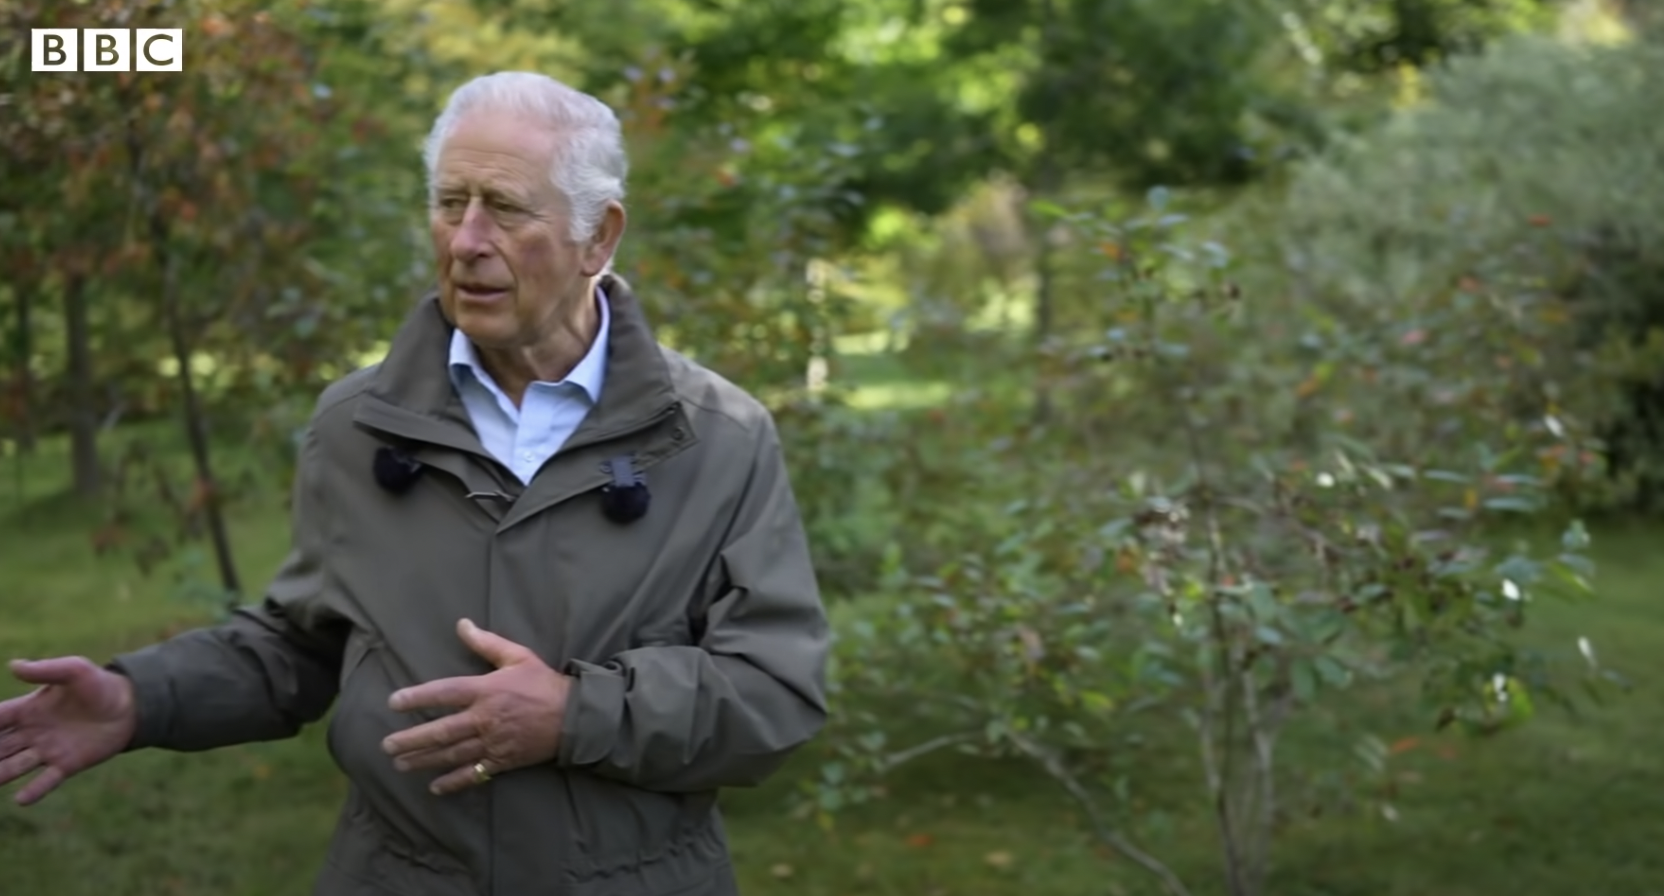 King Charles during an interview in the garden in Balmoral Estate, dated 2022 | Source: YouTube/BBC News